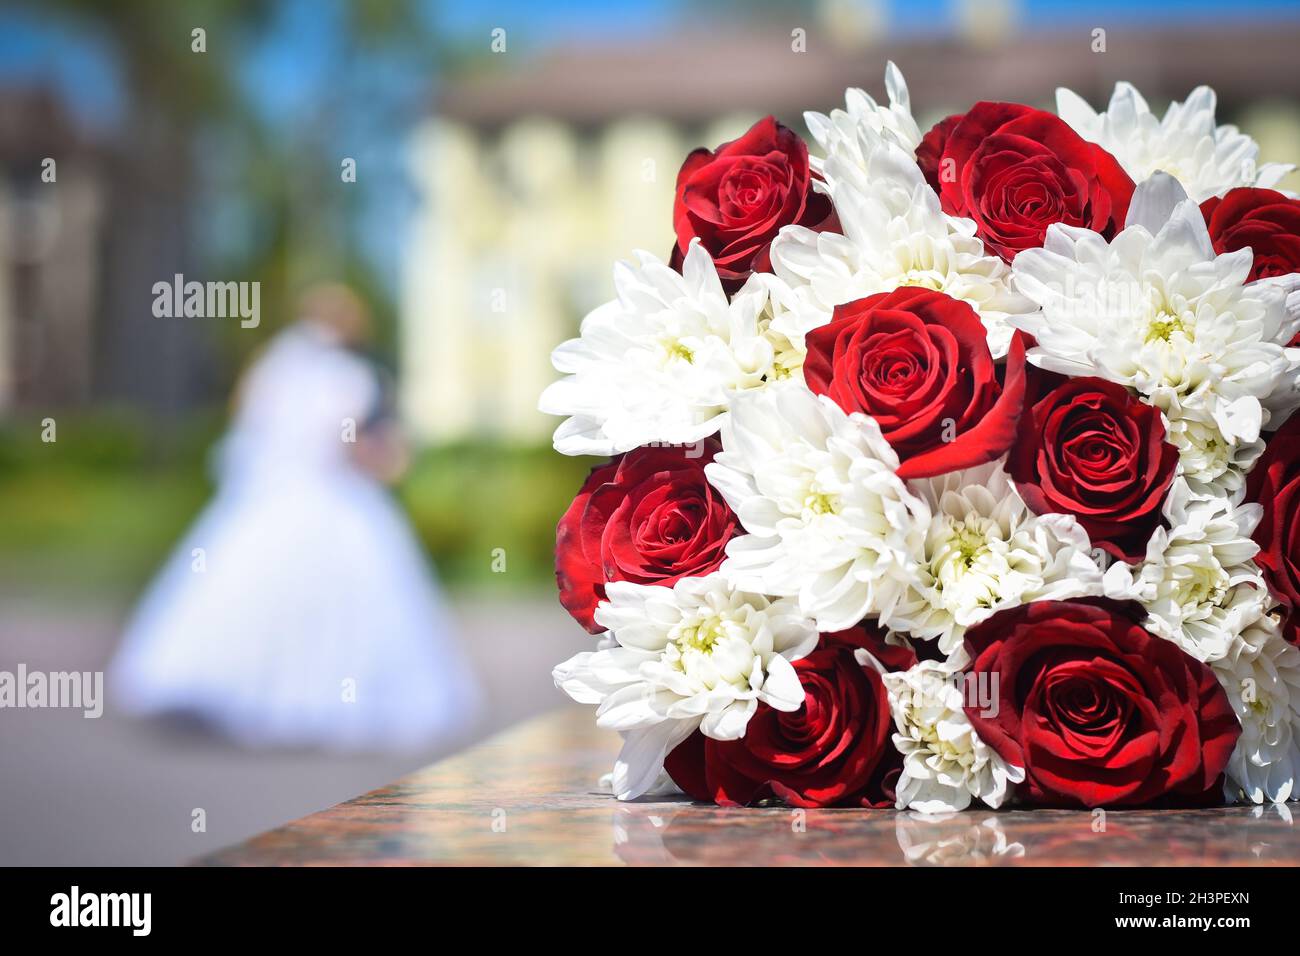 Woman Wearing White Gown With Red Roses On Background · Free Stock Photo